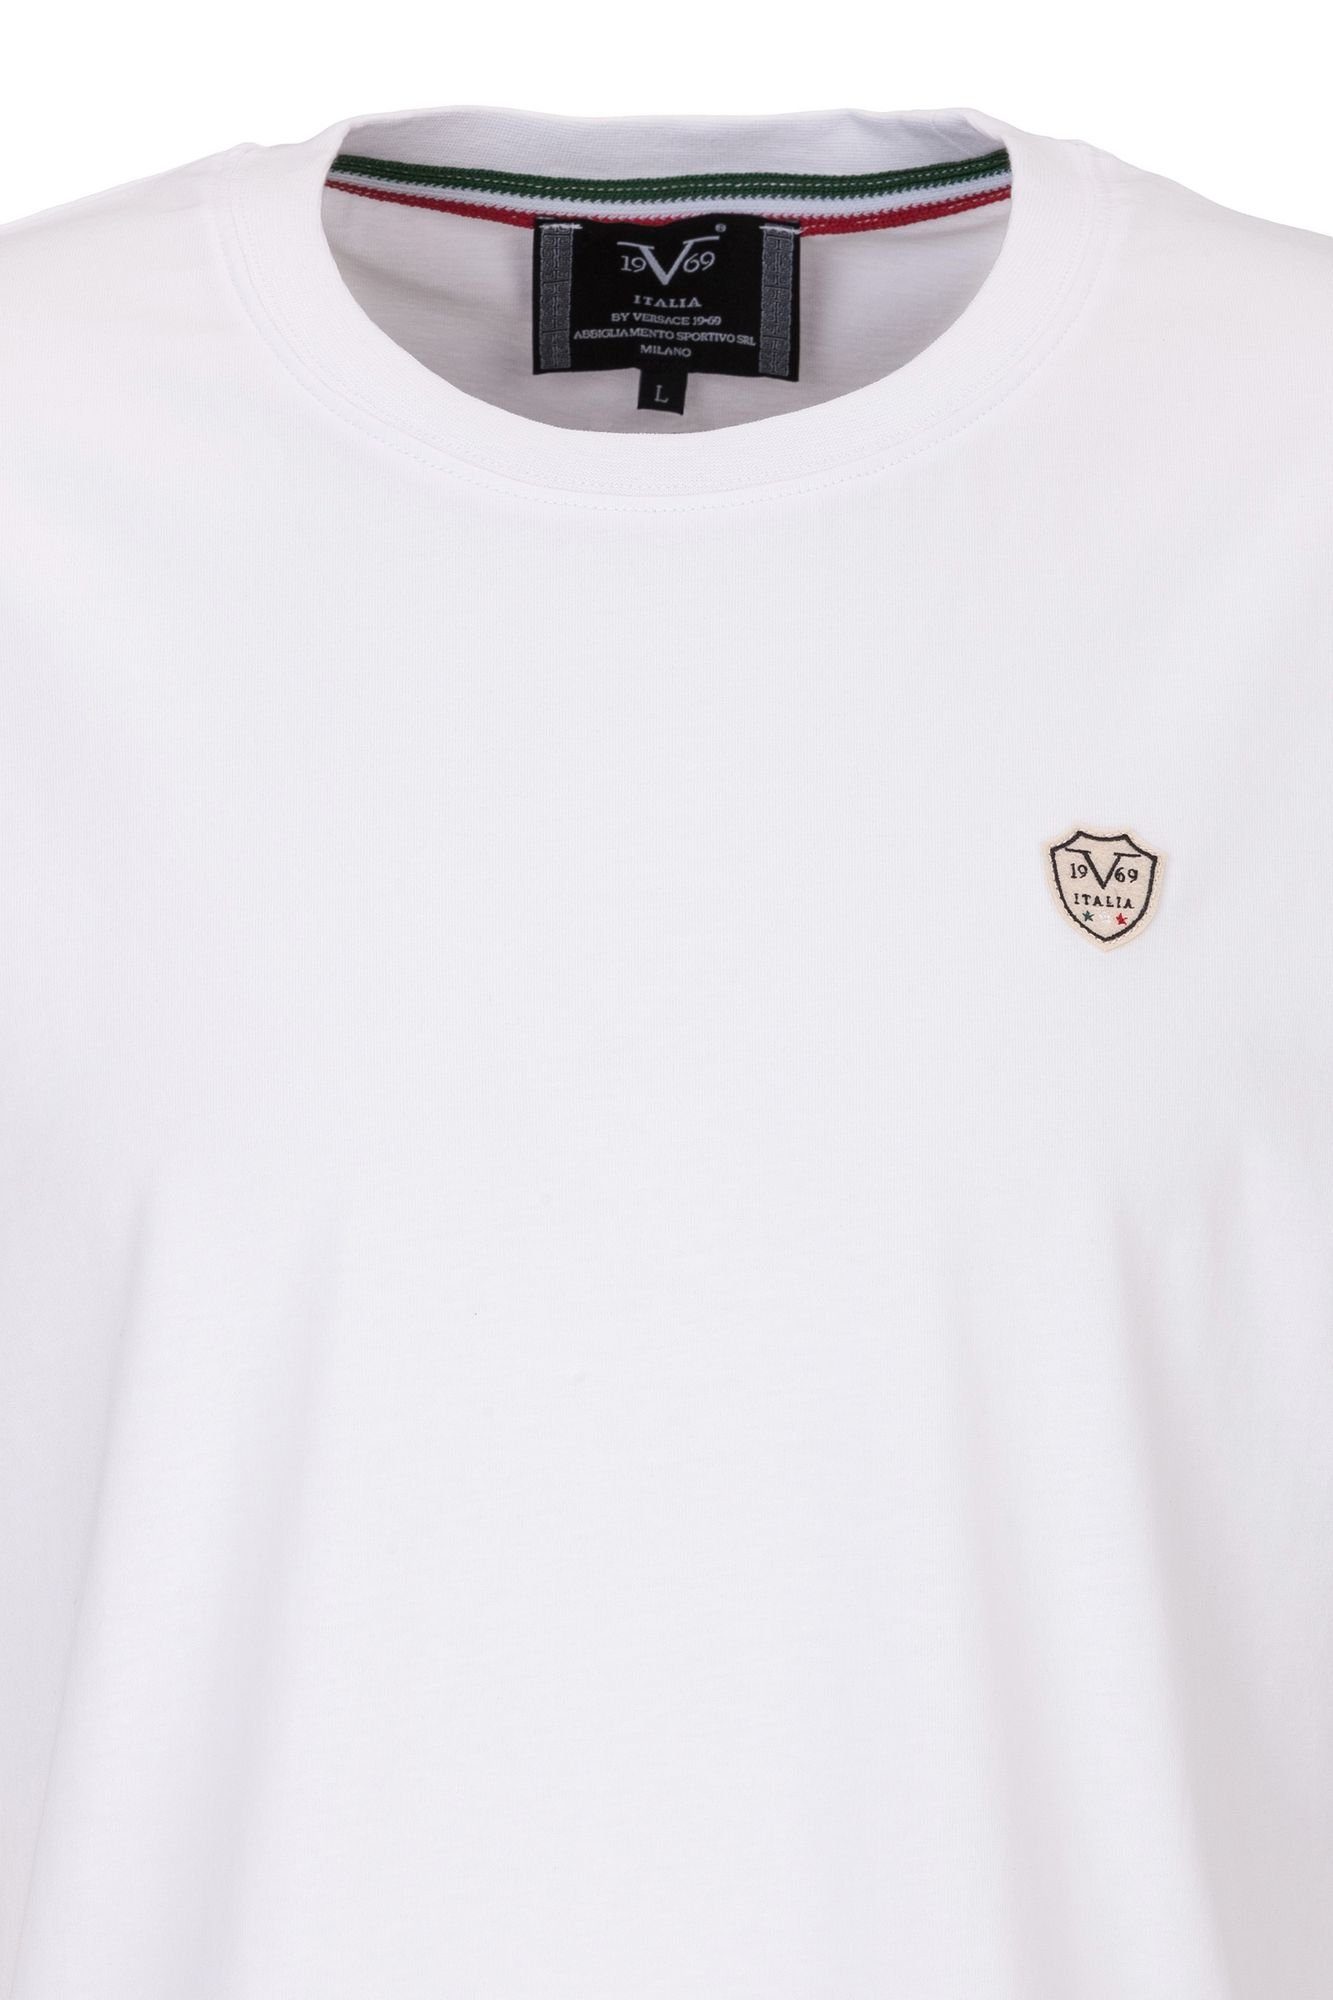 19V69 Versace by Injection T-Shirt WHITE Italia